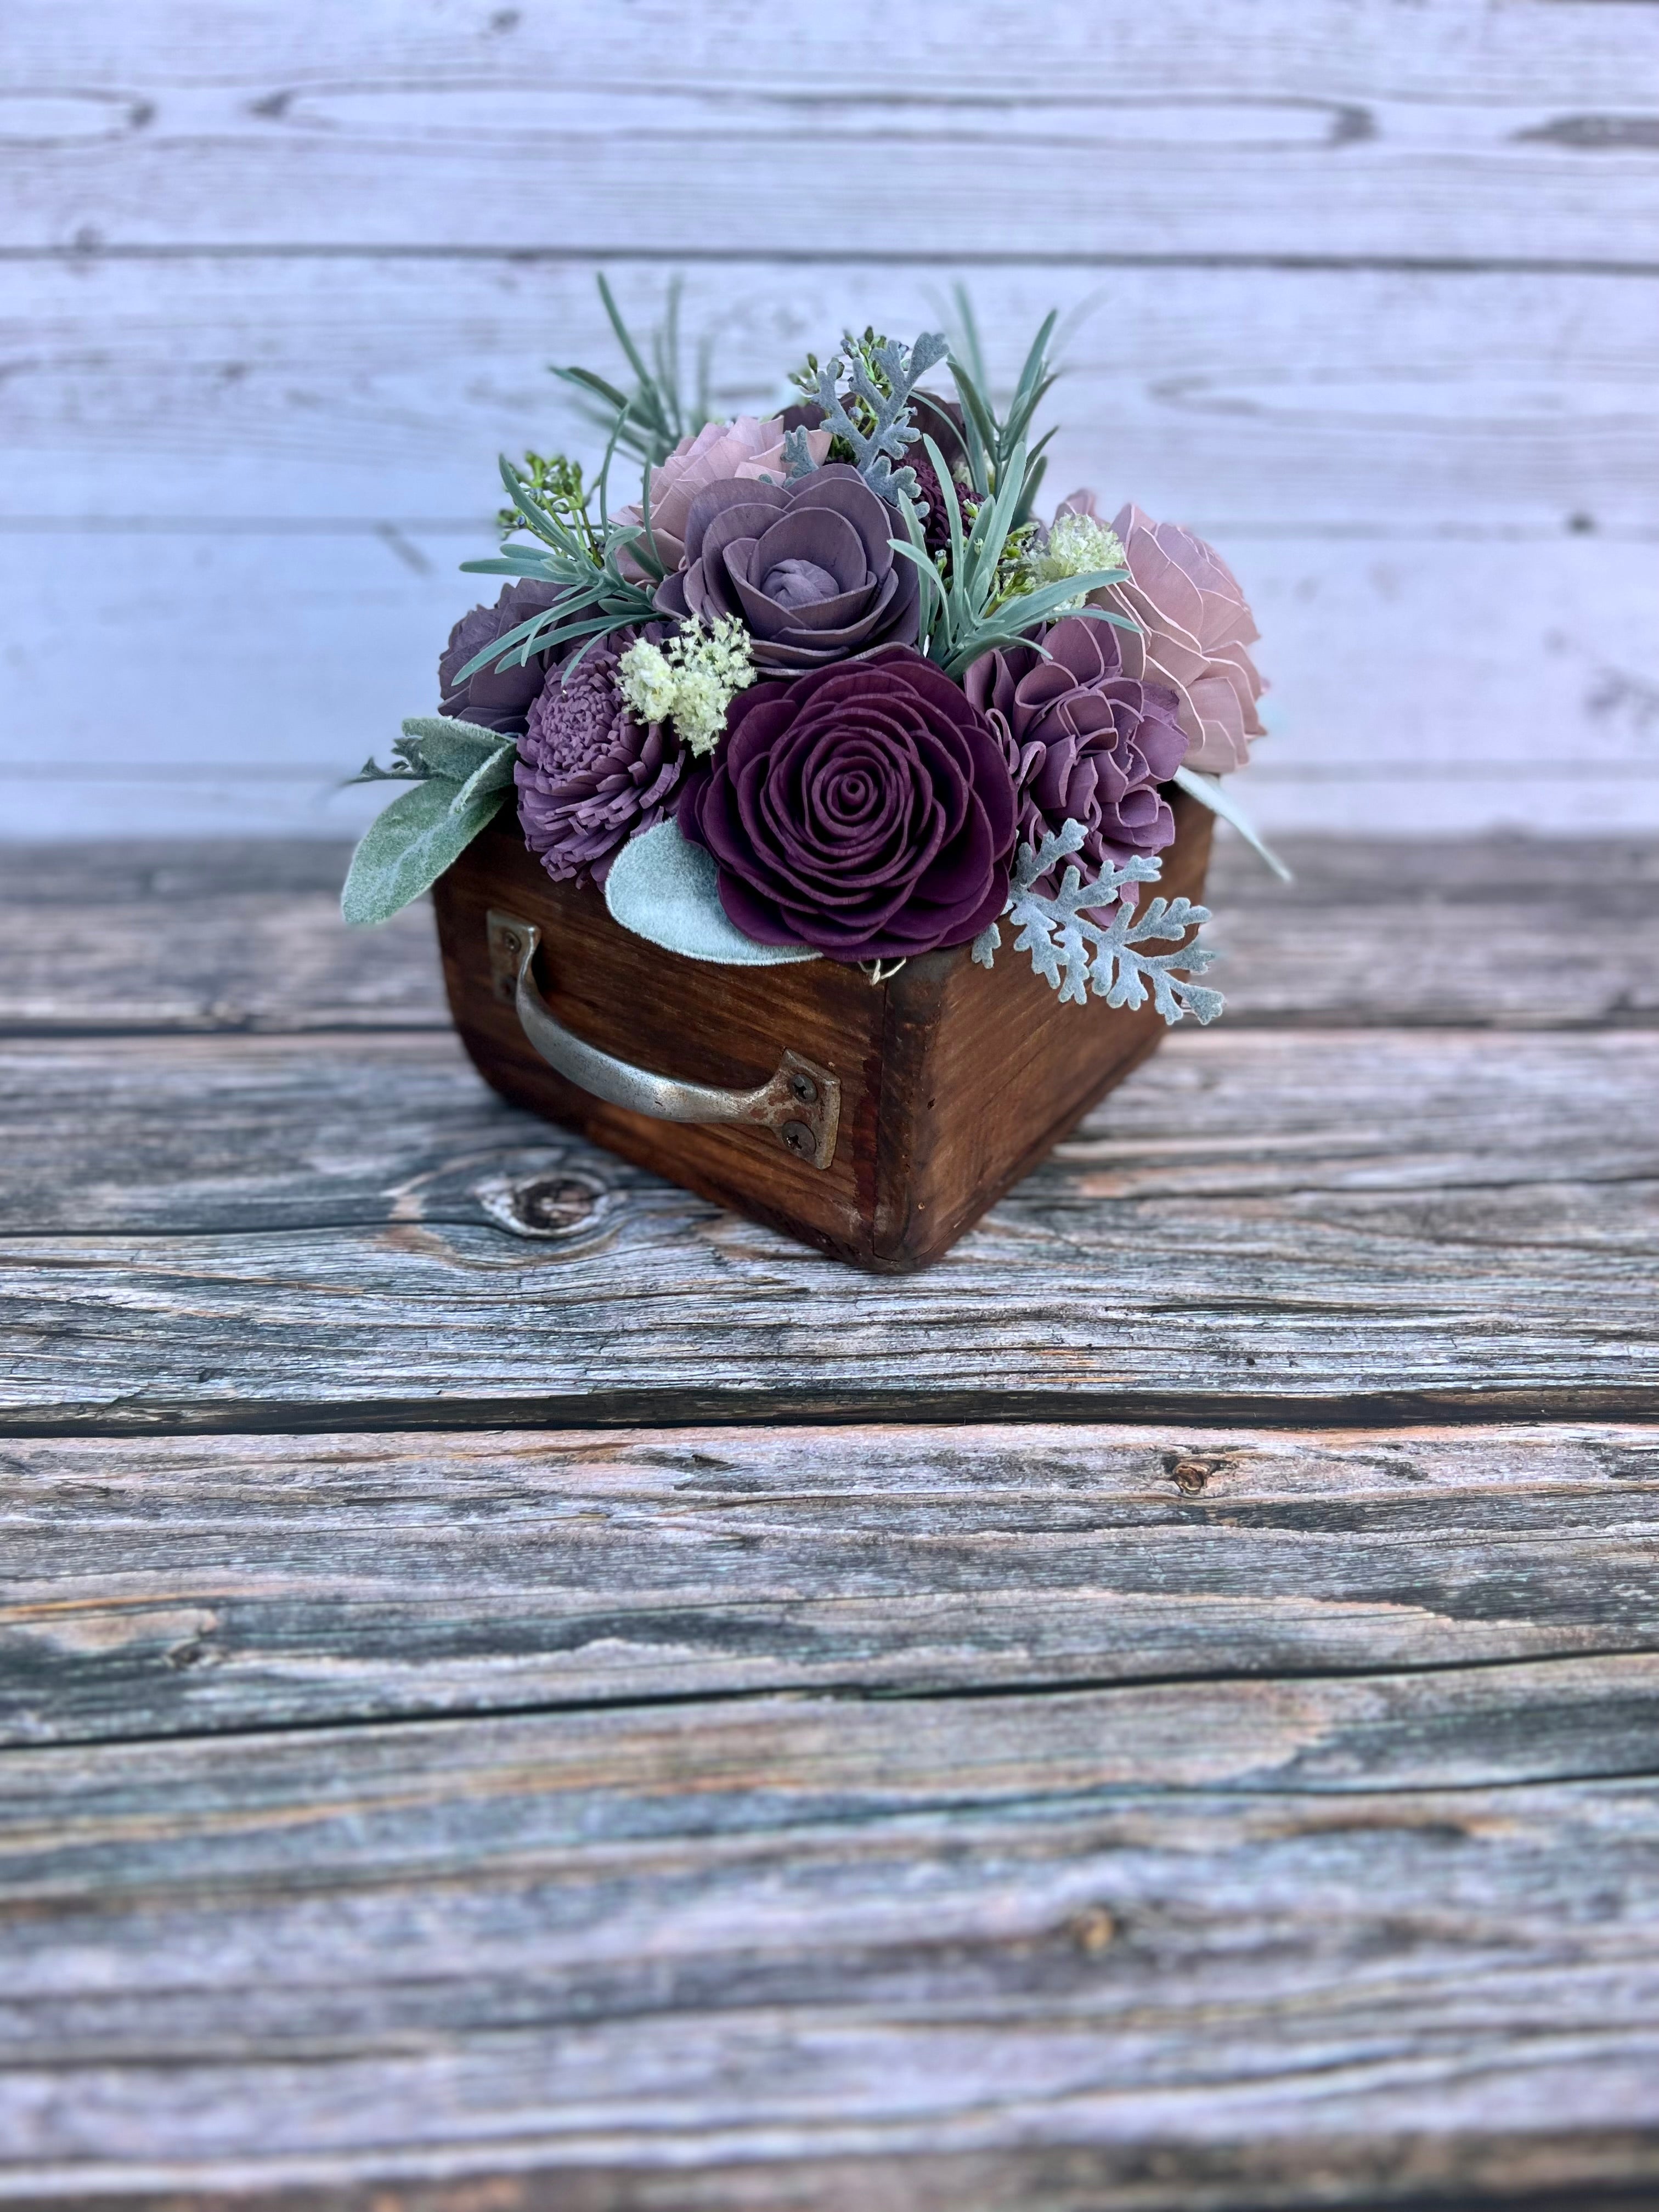 READY TO SHIP - Plum and Lavender Centerpiece